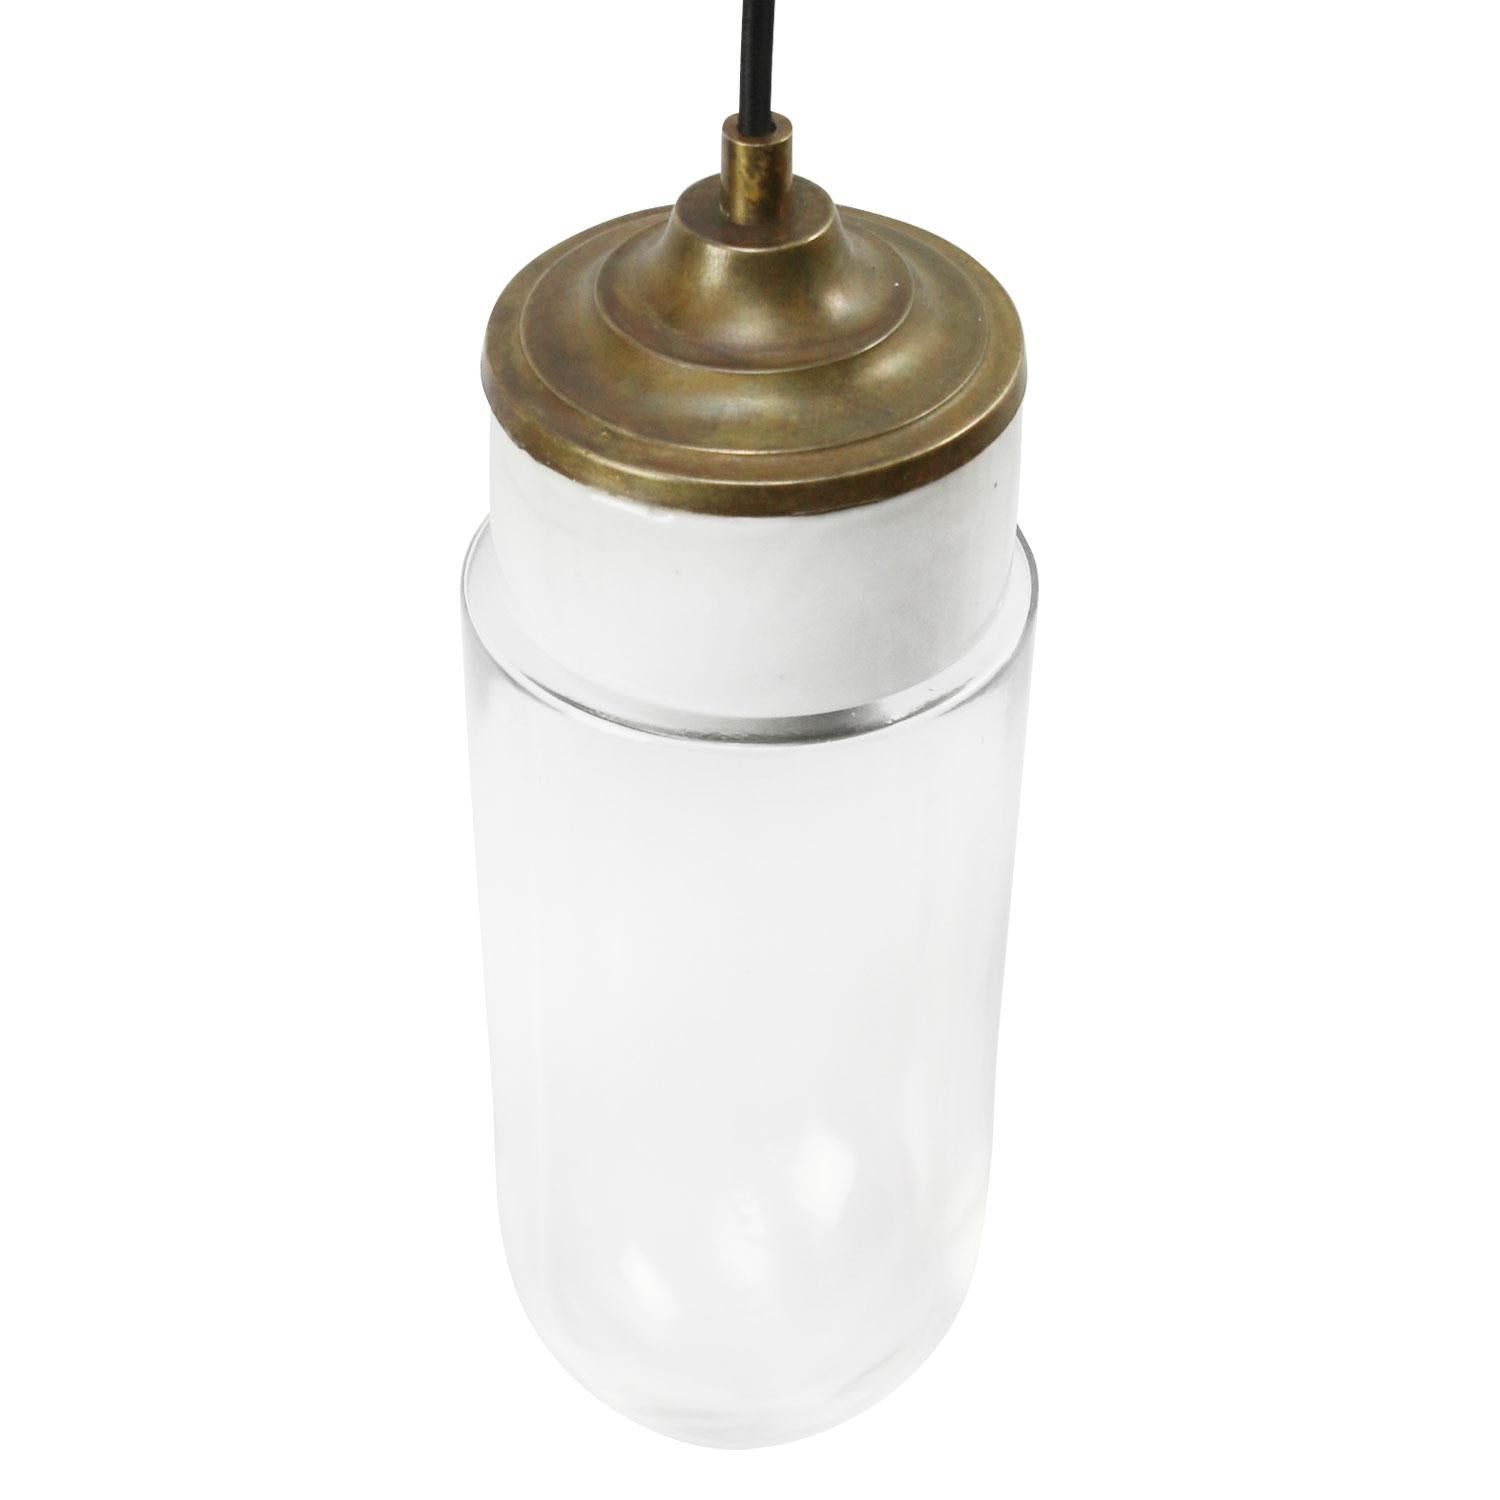 Porcelain industrial hanging lamp.
White porcelain, brass and clear glass.
2 conductors, no ground.

Weight: 1.40 kg / 3.1 lb

Priced per individual item. All lamps have been made suitable by international standards for incandescent light bulbs,